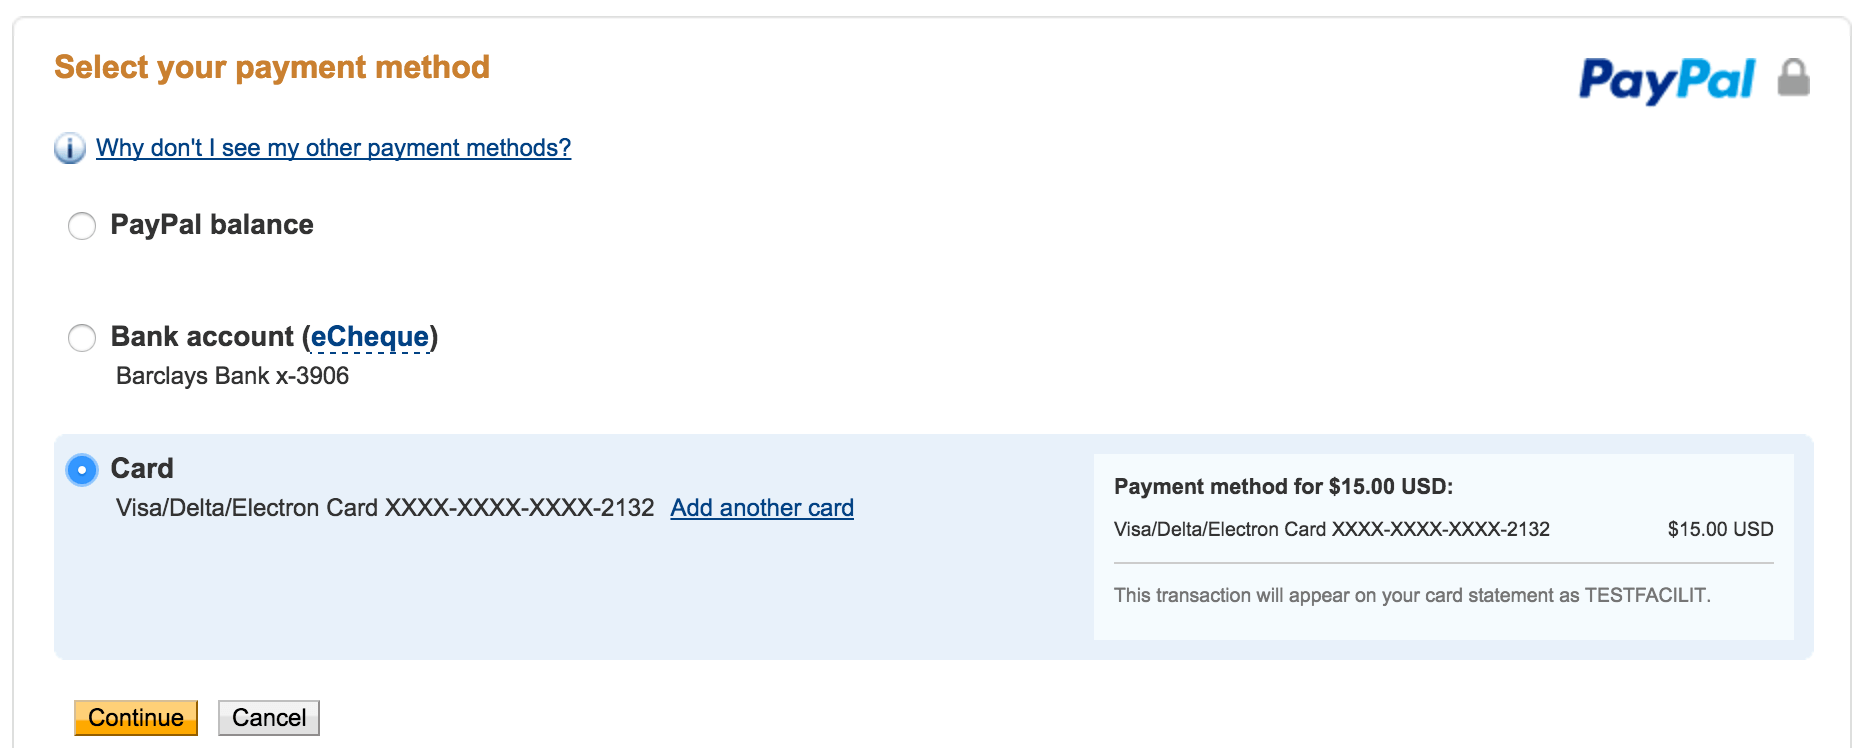 The Payment Selection screen in PayPal.